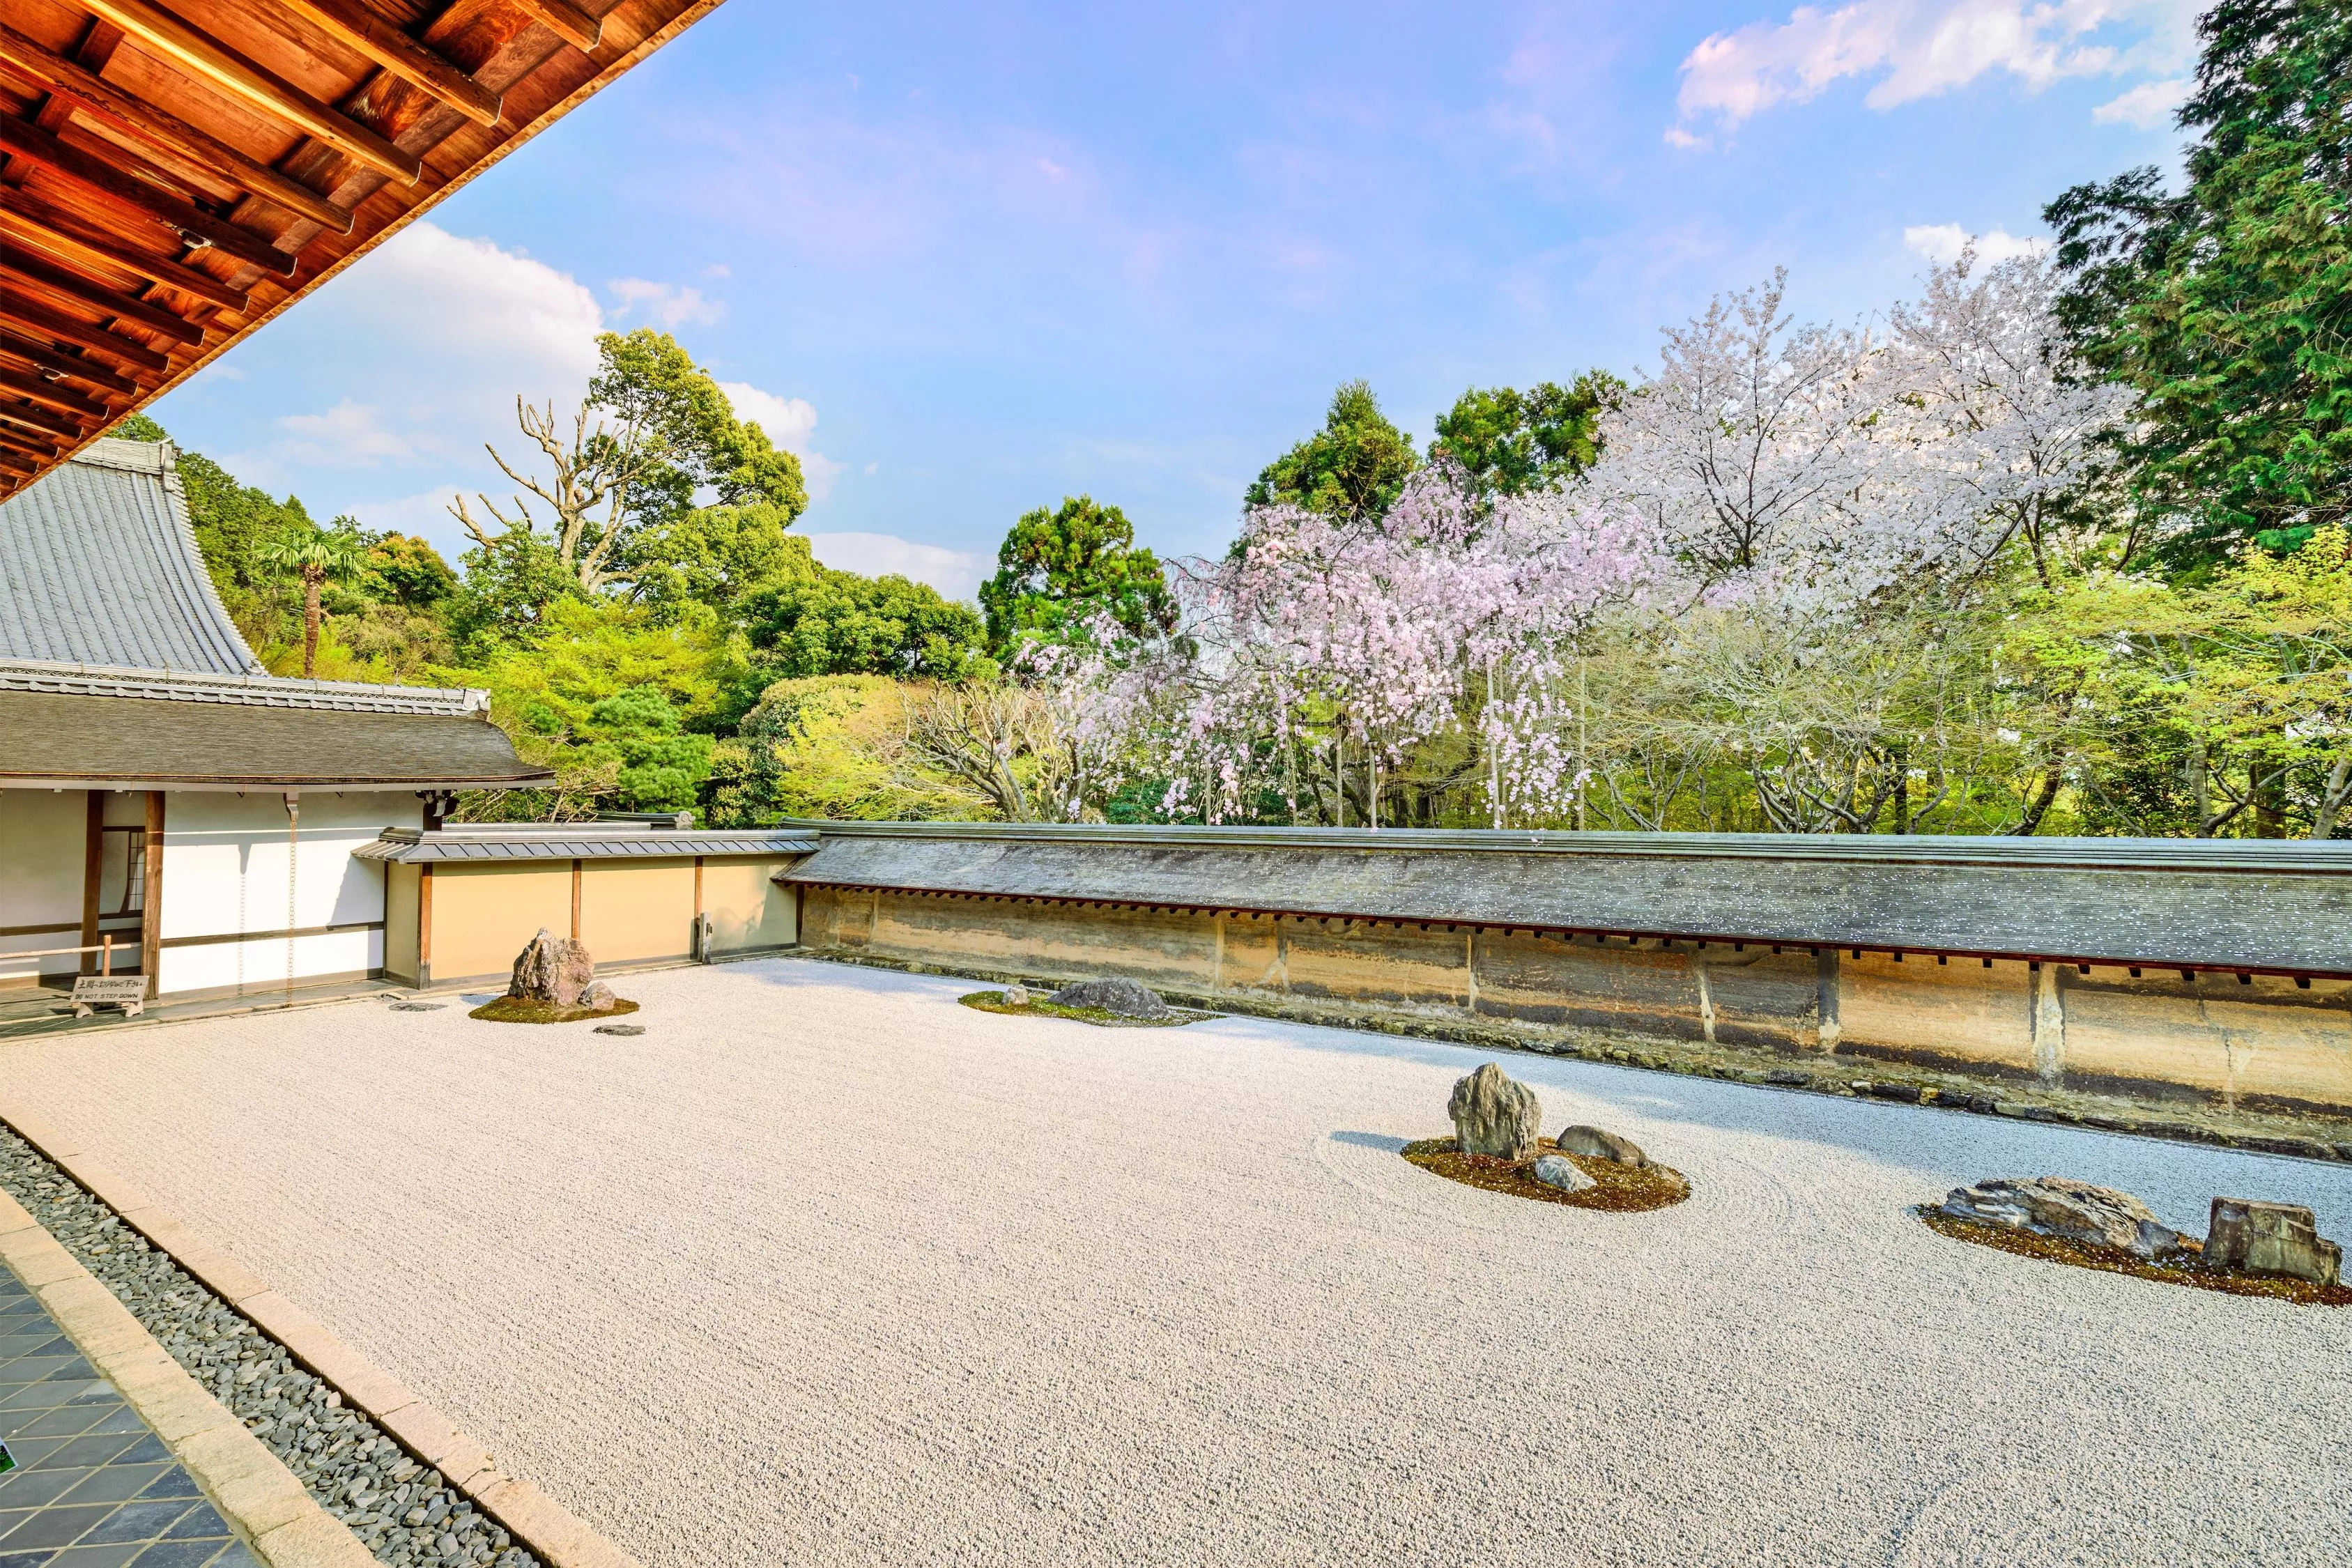 Ryoan-ji in Japan, East Asia | Architecture,Gardens - Rated 3.8